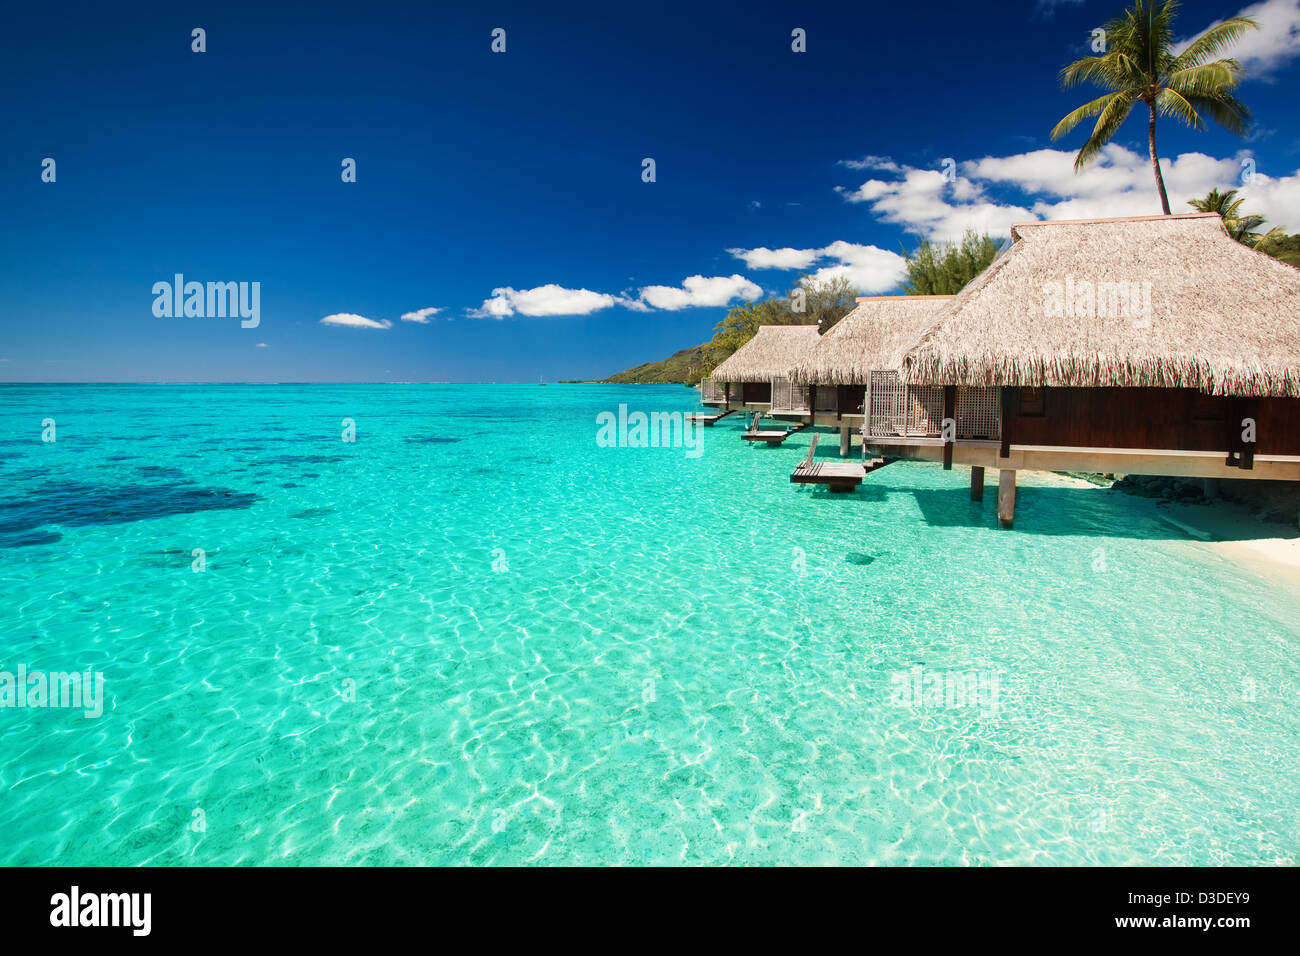 Villas on the green tropical beach with steps into water Stock Photo